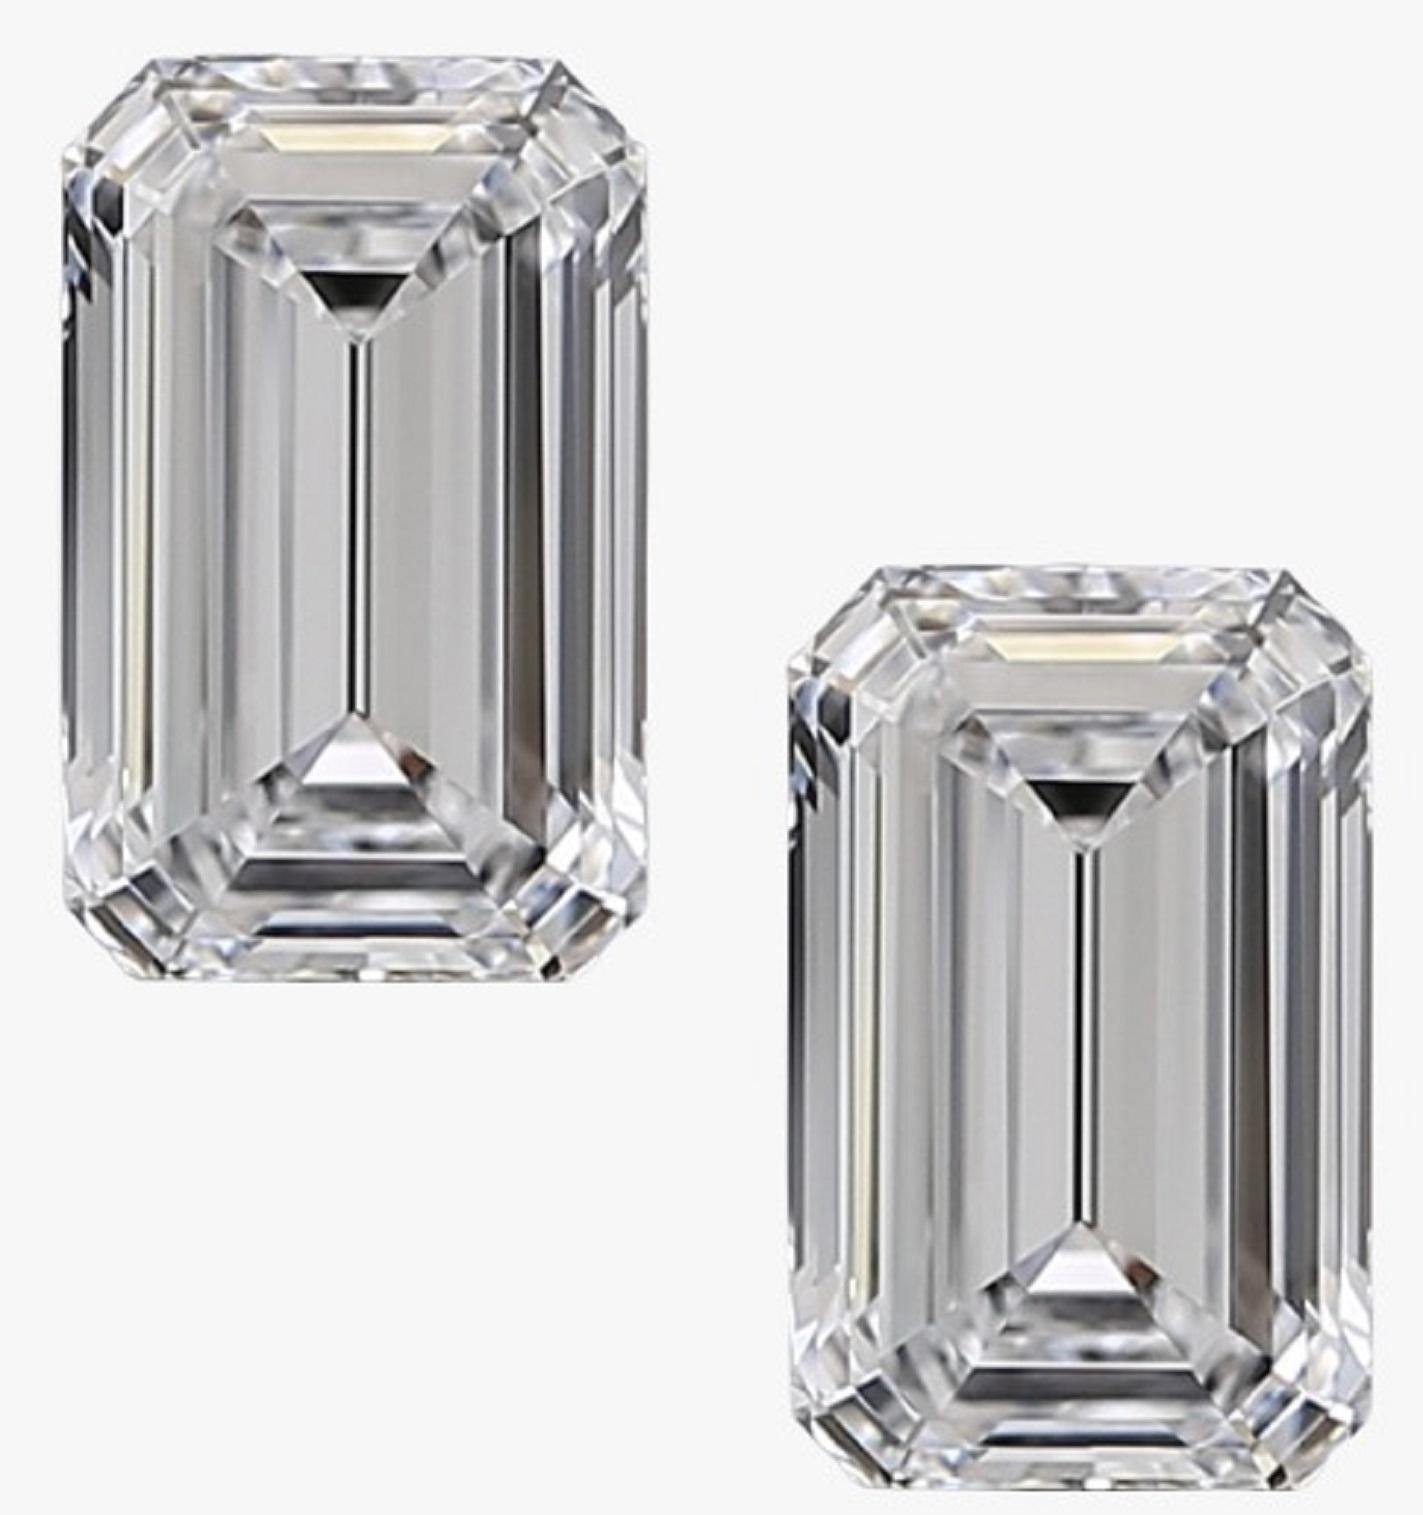 A perfect match of flawless emerald cut diamonds the perfect Christma's gift mounted in solid platinum with double delicate prongs for major security and la pousette backs.

We can change the mounting to push backs.